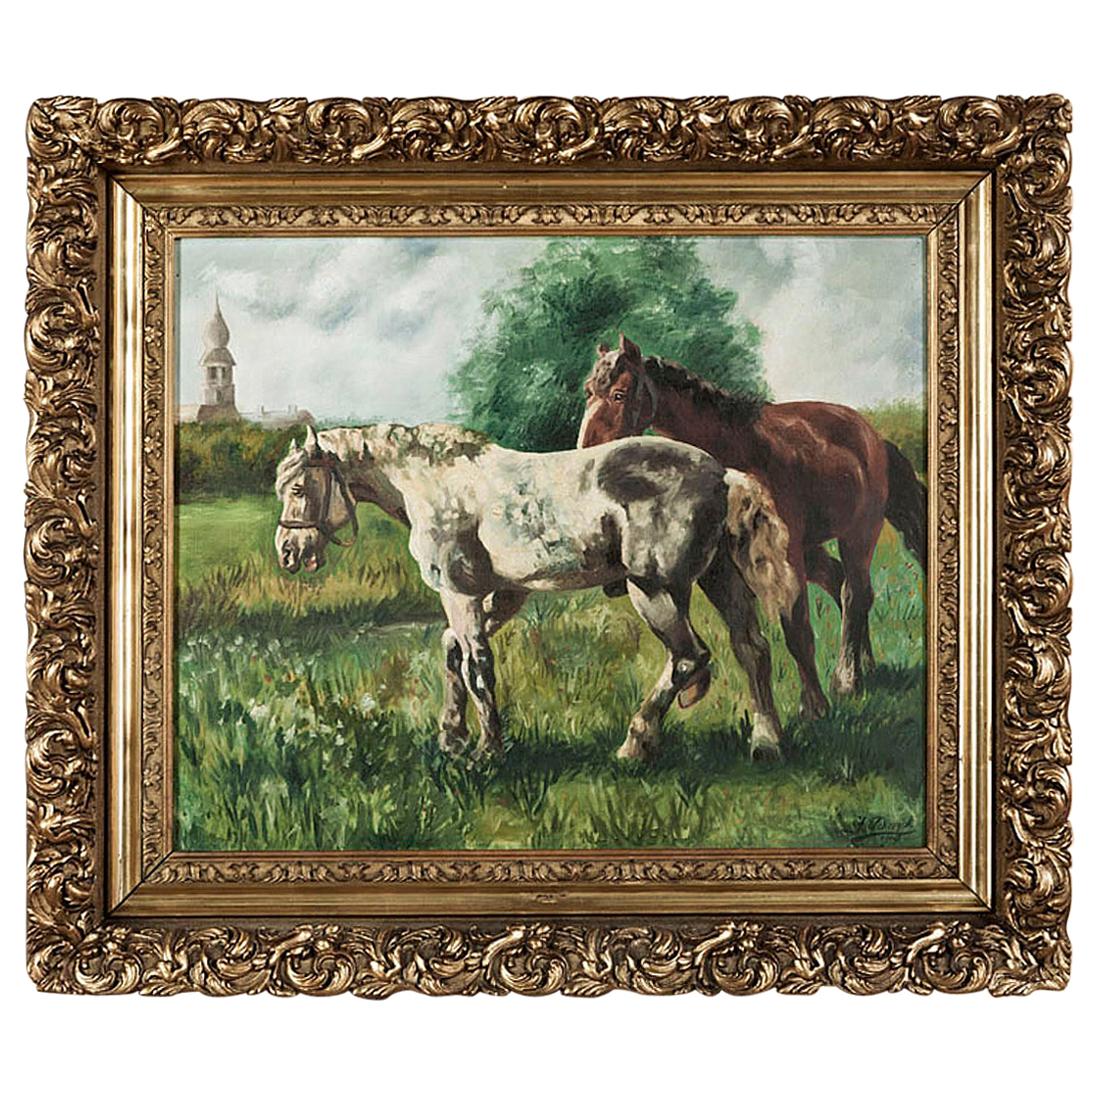 Antique Framed Dutch Oil Painting on Canvas by G. Diervjck, Dated 1907